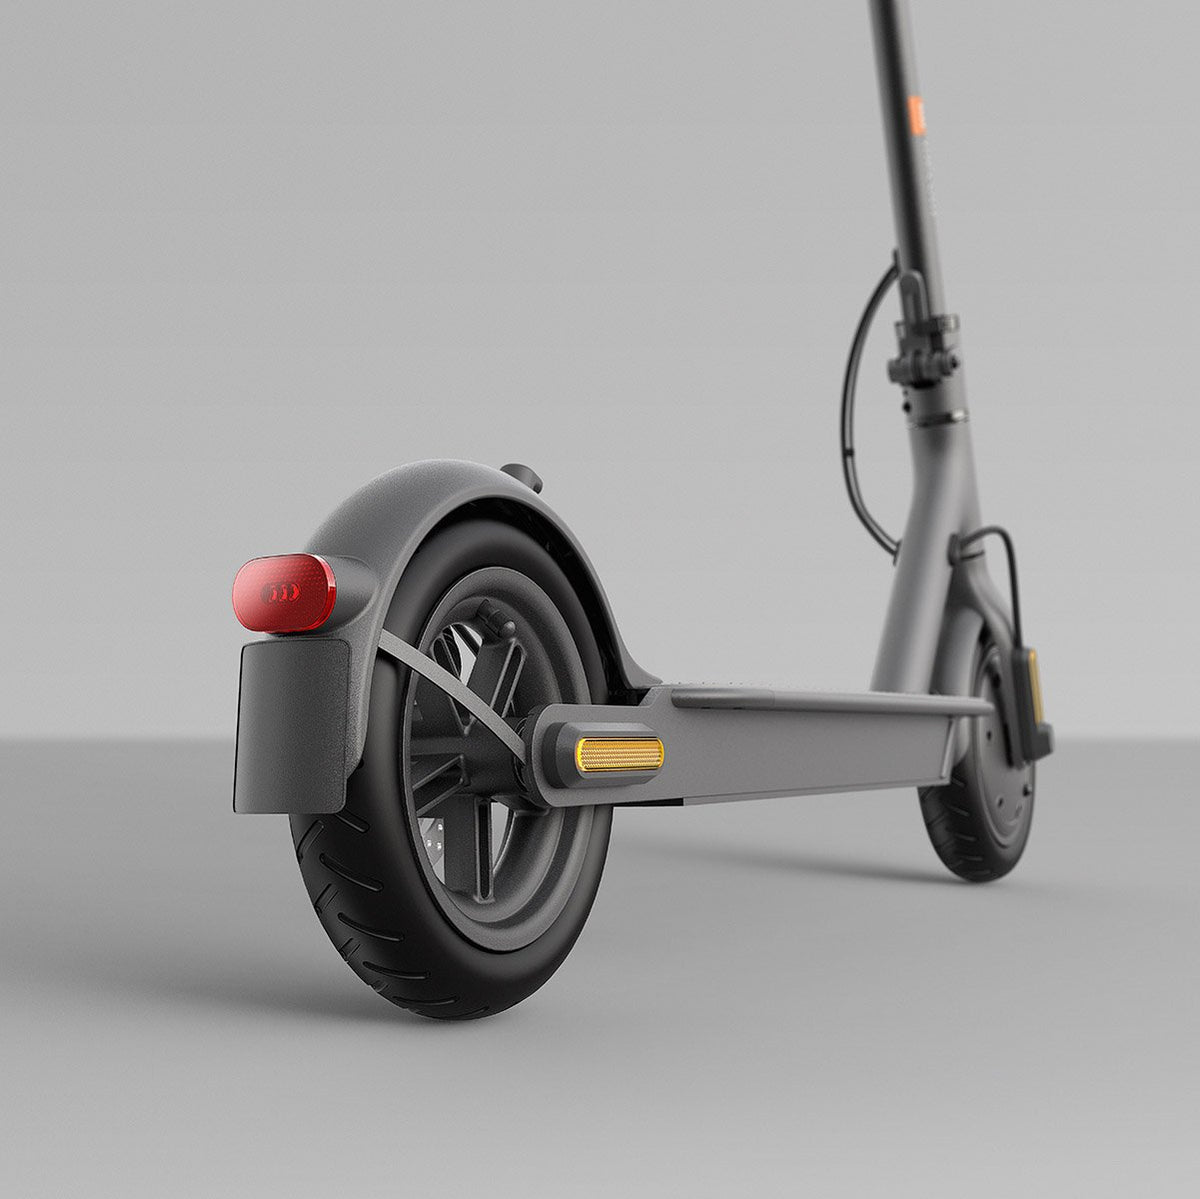 Xiaomi Mi 1S Electric Scooter-Electric Scooters London